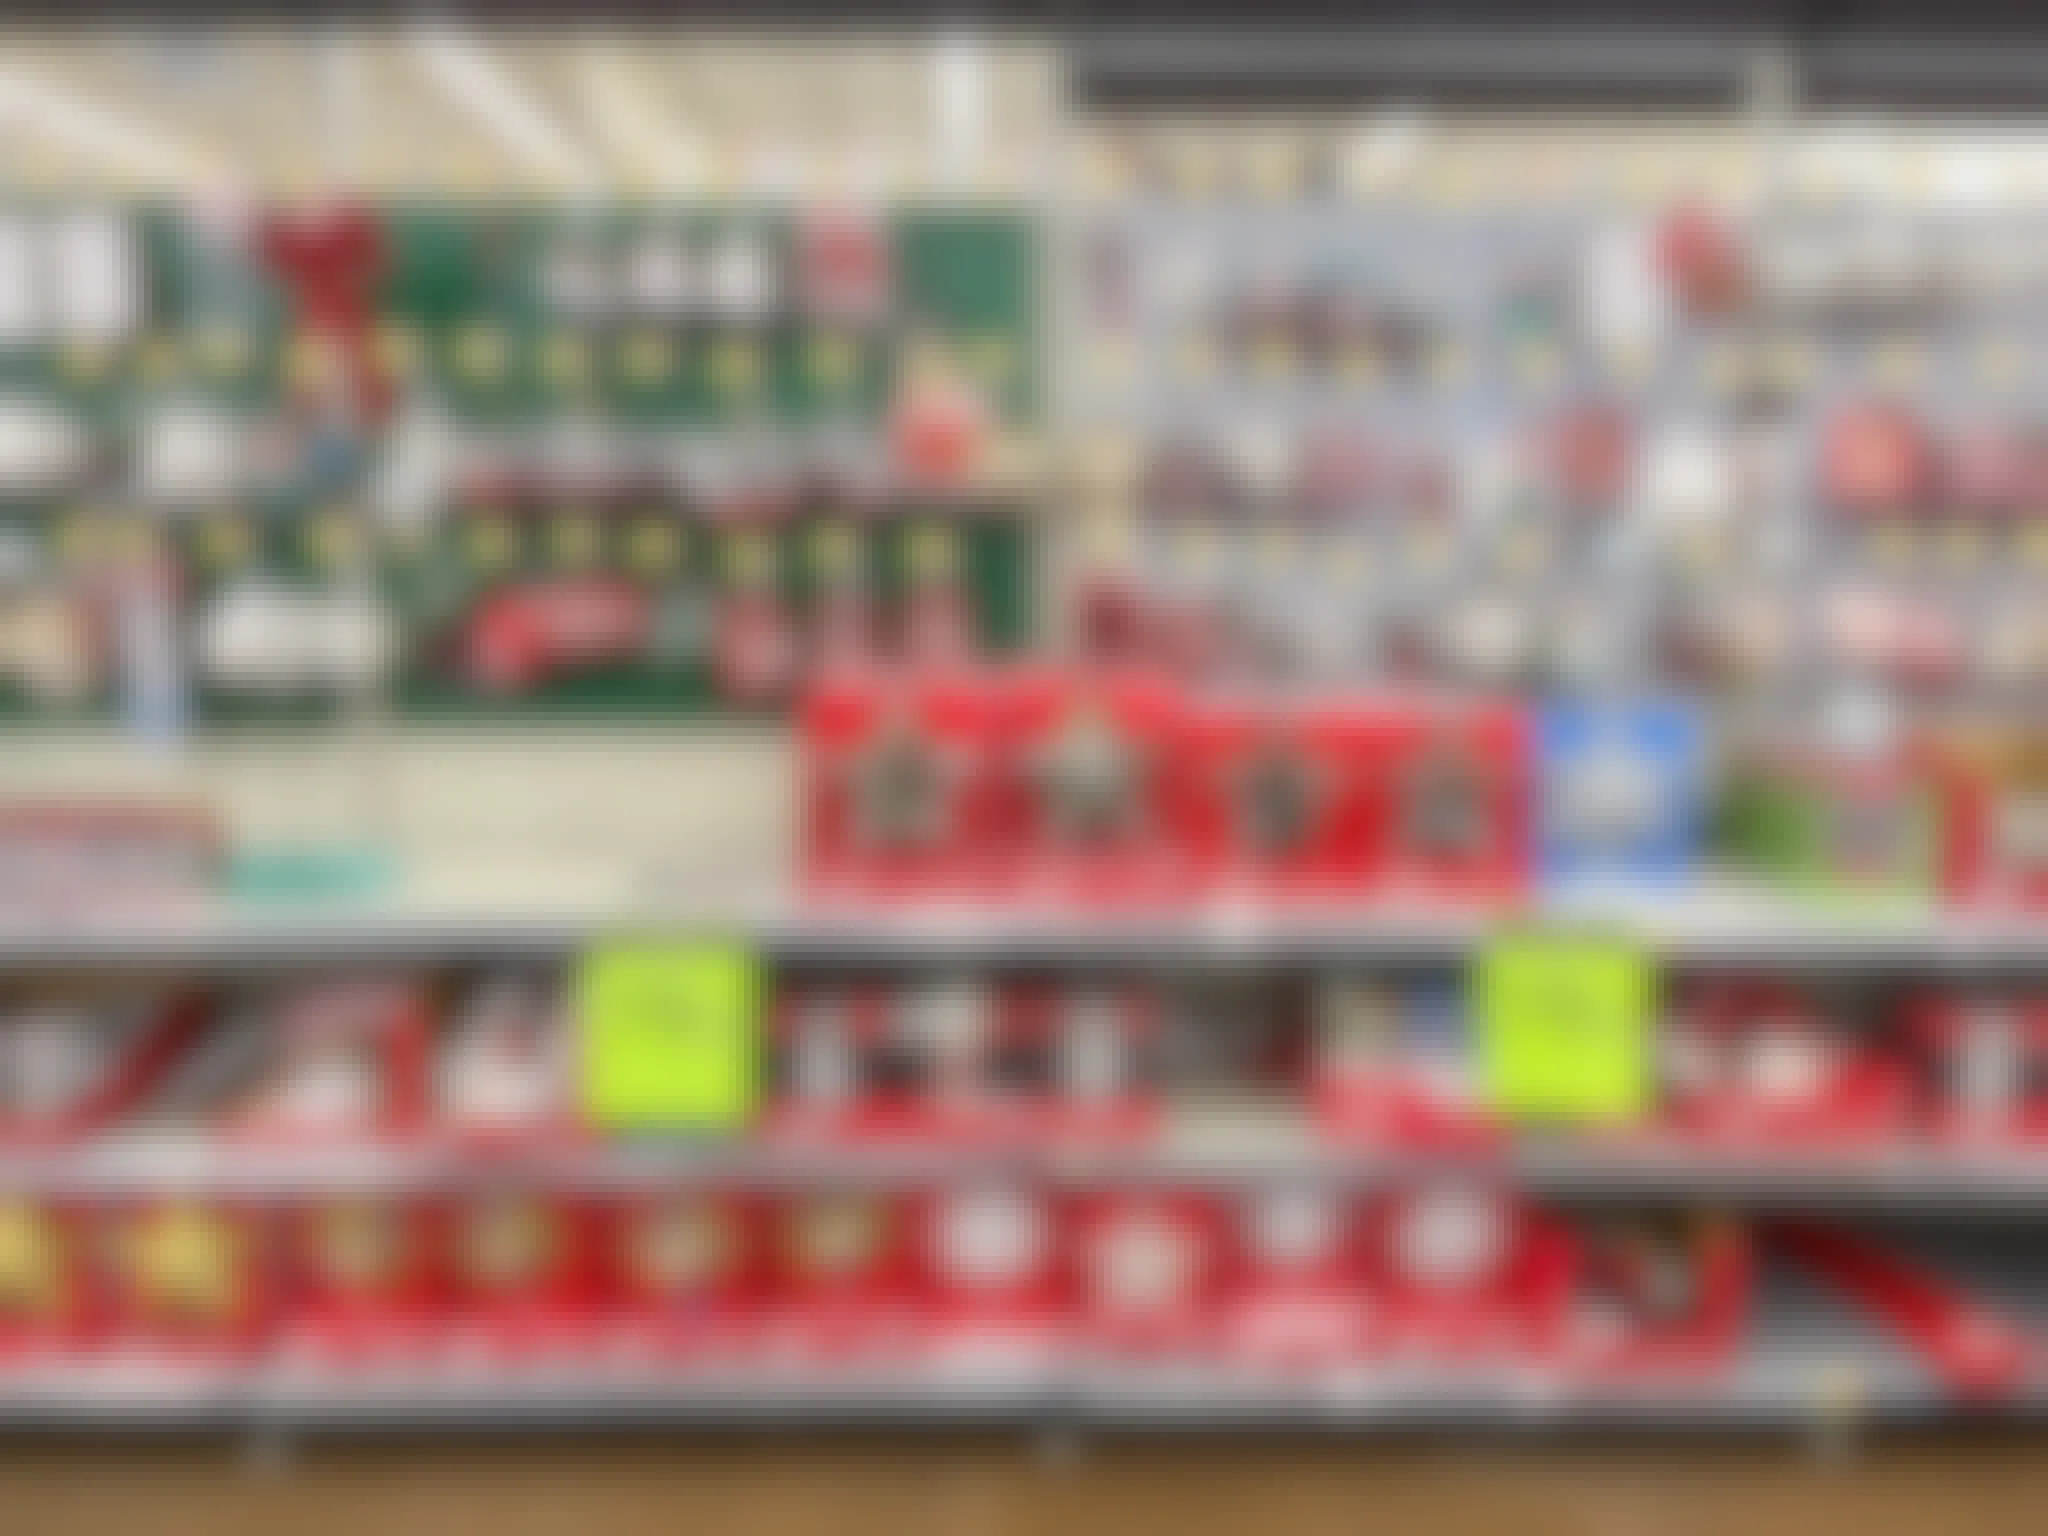 Shelves of Christmas clearance with 75% off sale signs at Walmart.